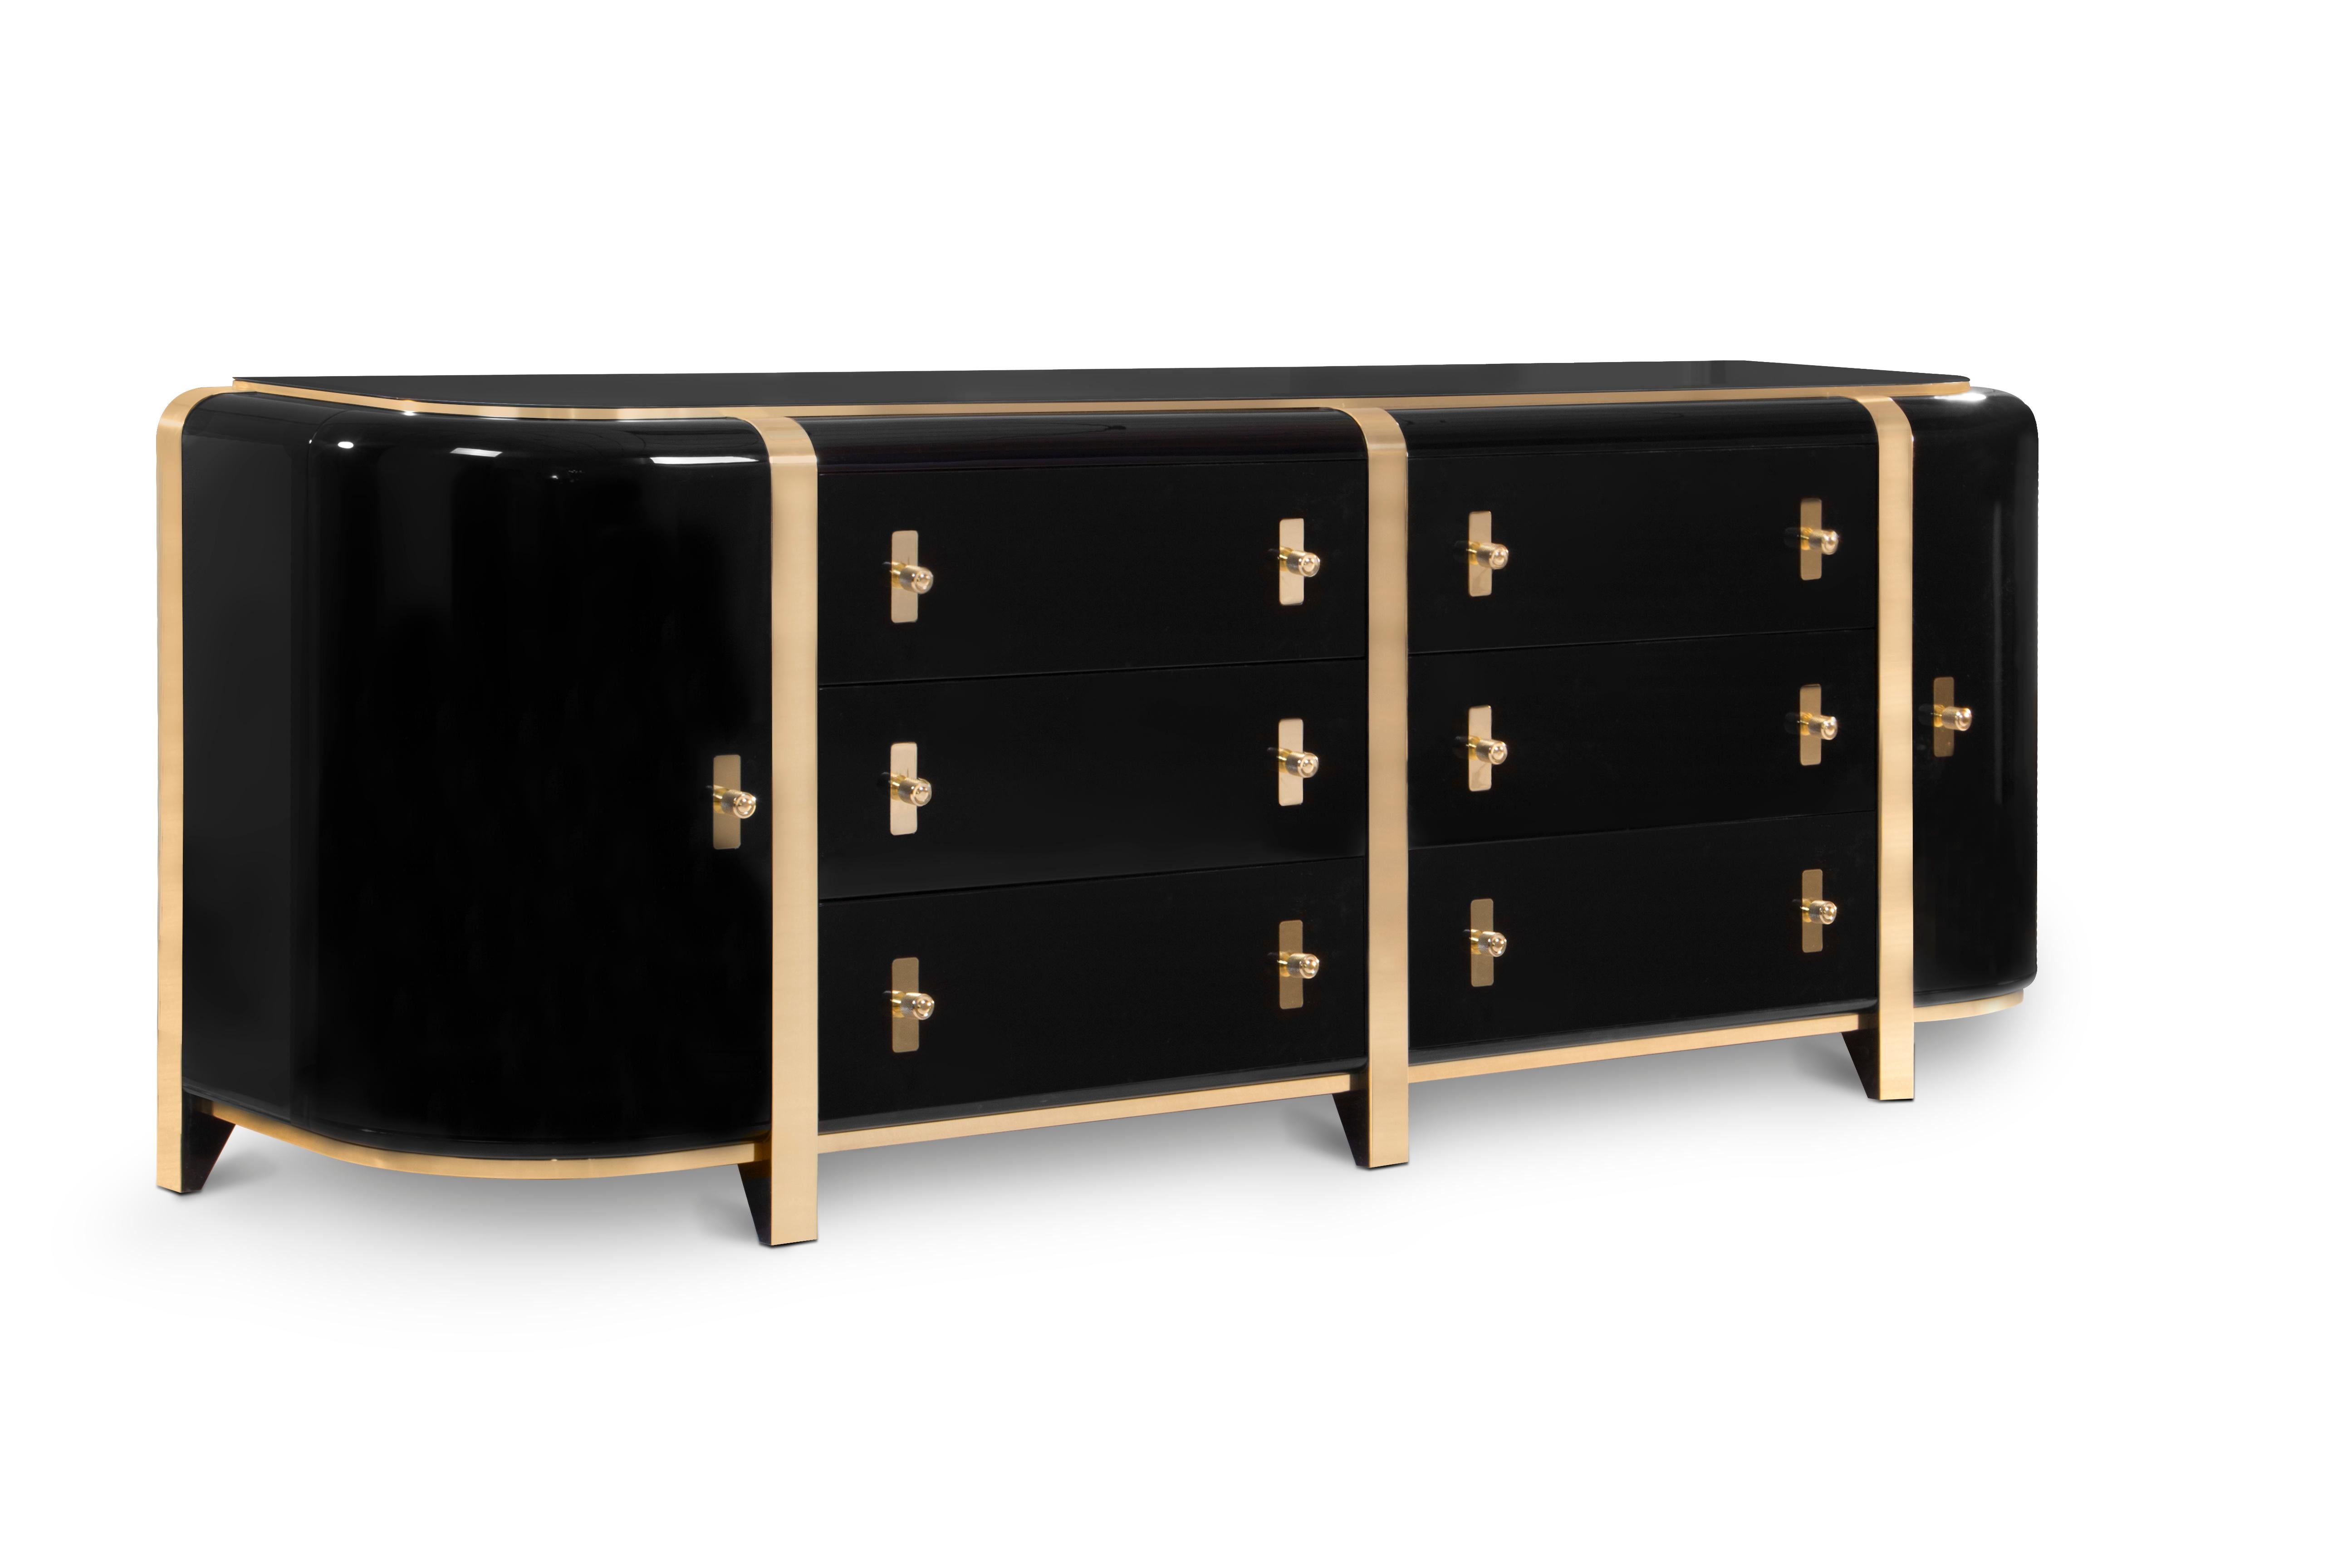 A sideboard with a strong presence while preserving clean lines. Kahn is inspired by Louis Kahn’s monumental and monolithic style. Large brass details envelop the glossy black body while the black glass top adds a luxurious layer to the design. The